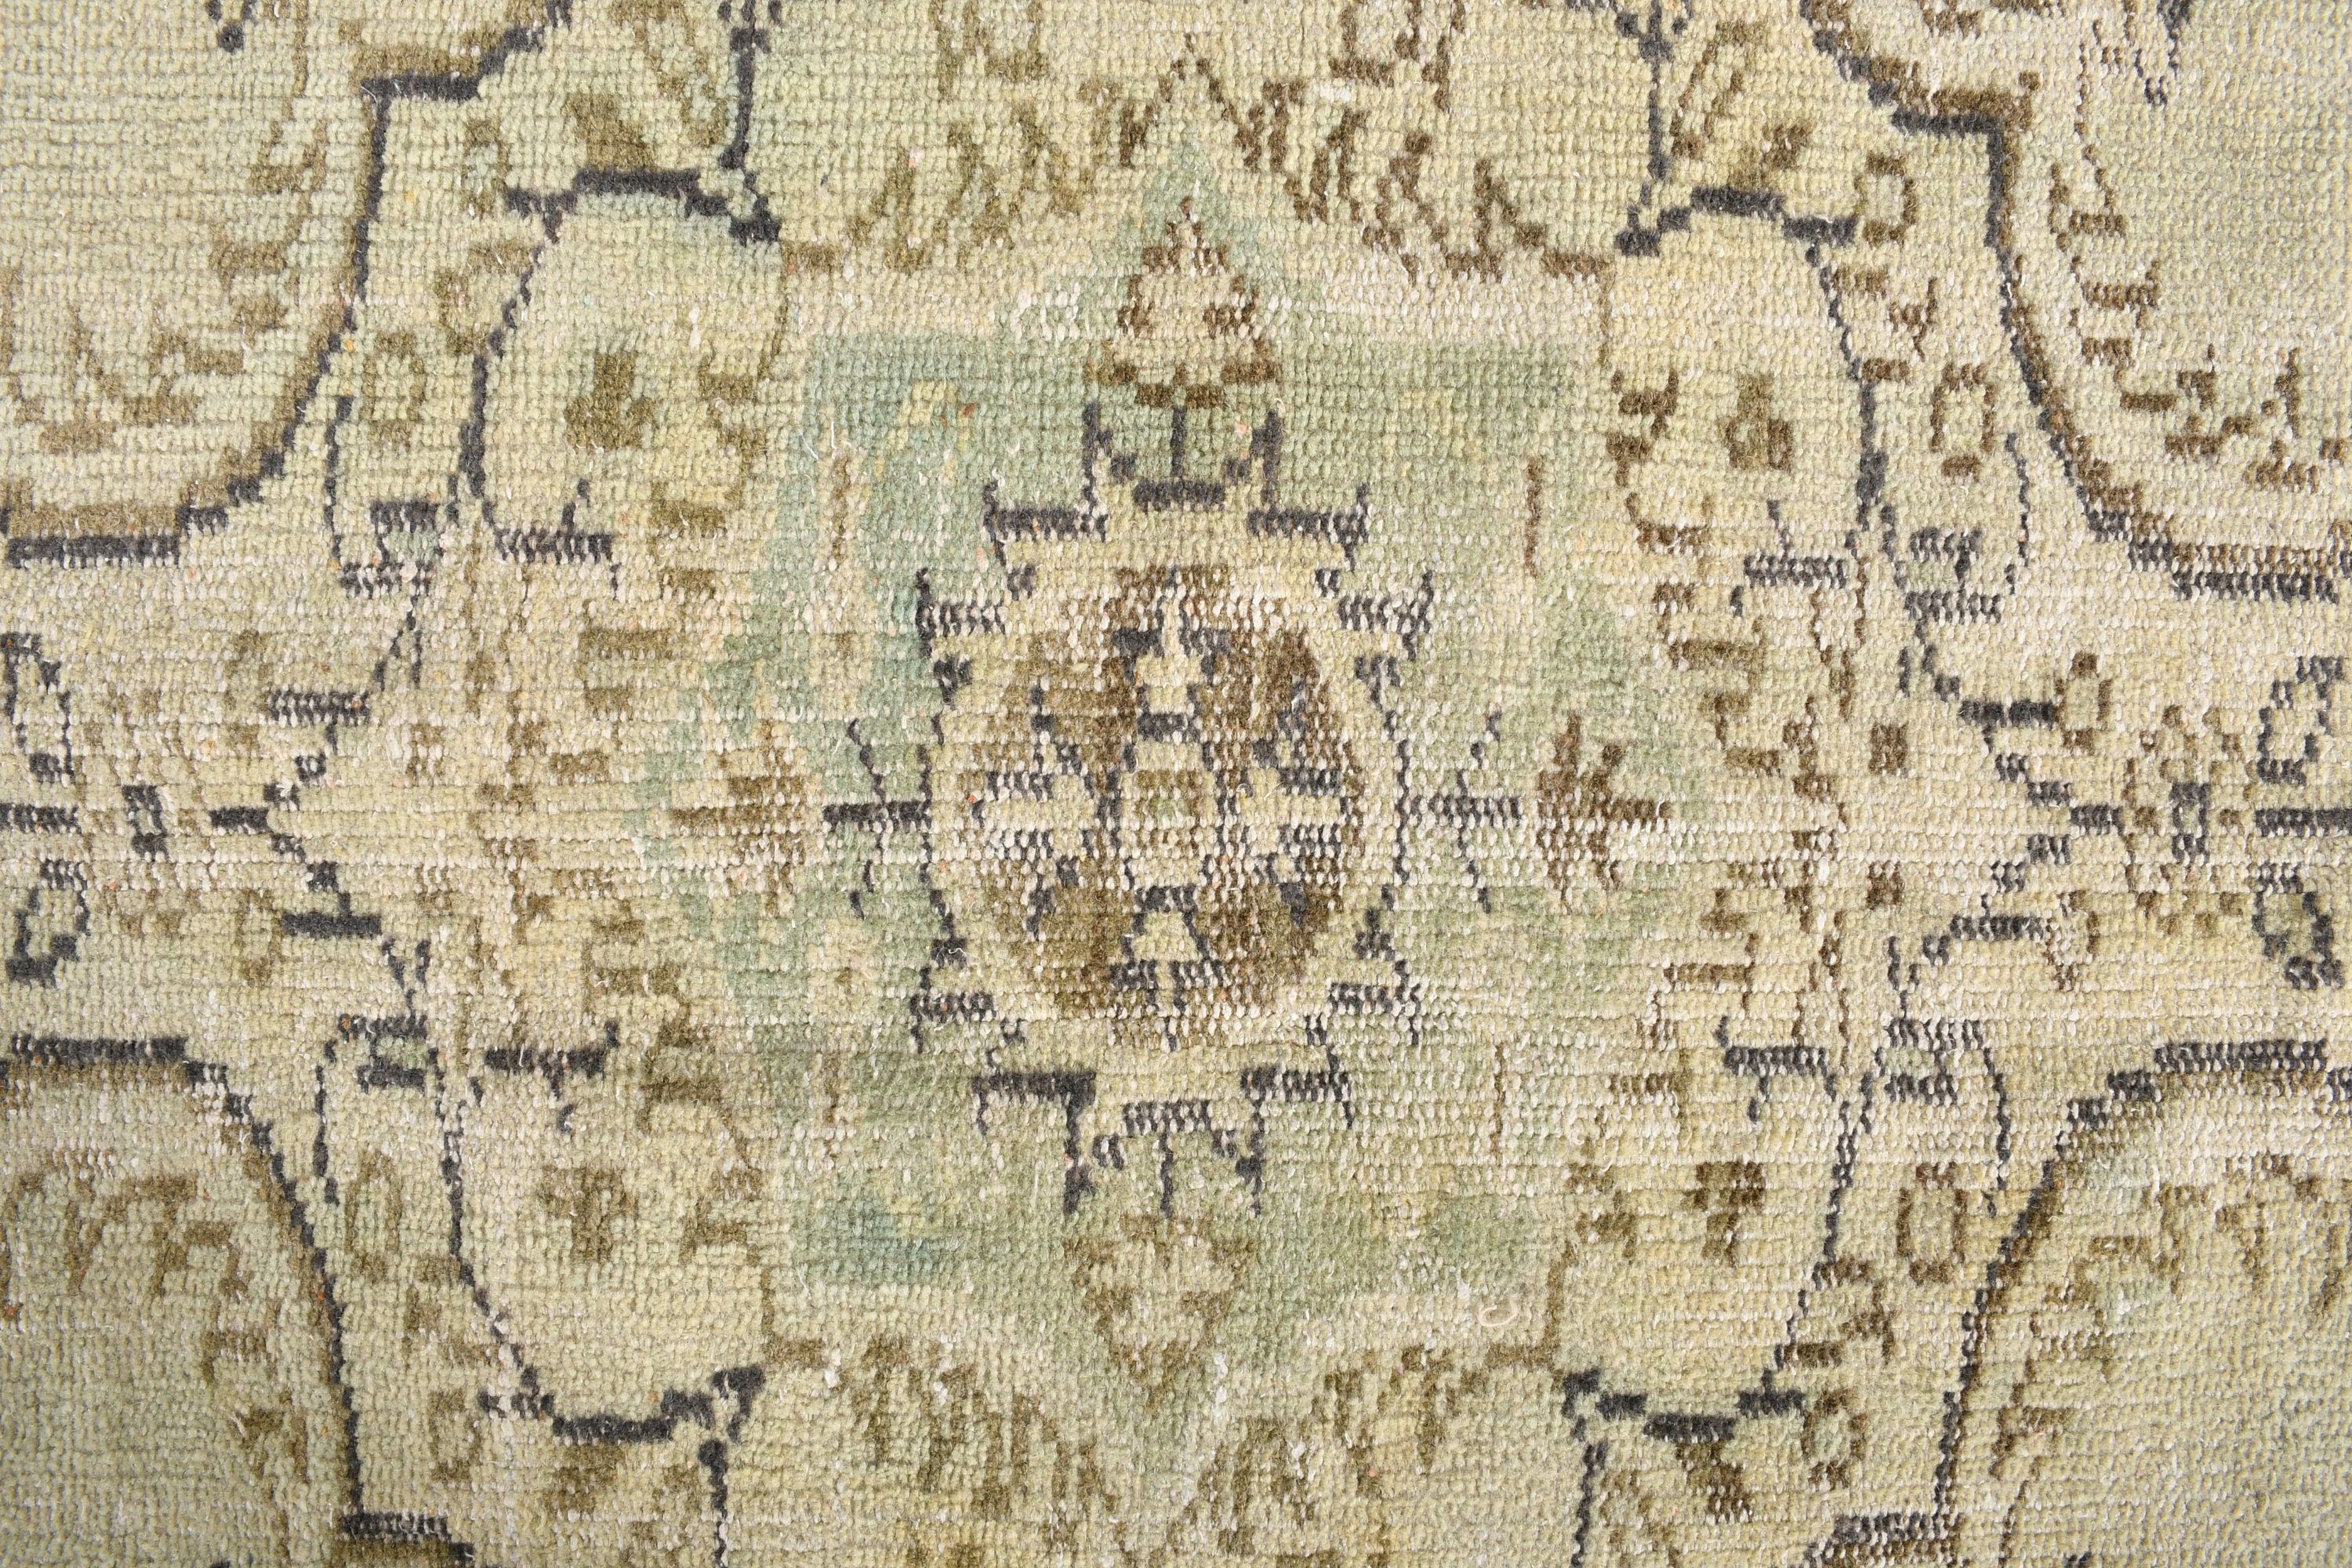 Green Home Decor Rug, Turkish Rugs, Home Decor Rugs, Living Room Rug, 6x9.6 ft Large Rugs, Vintage Rug, Salon Rug, Muted Rugs